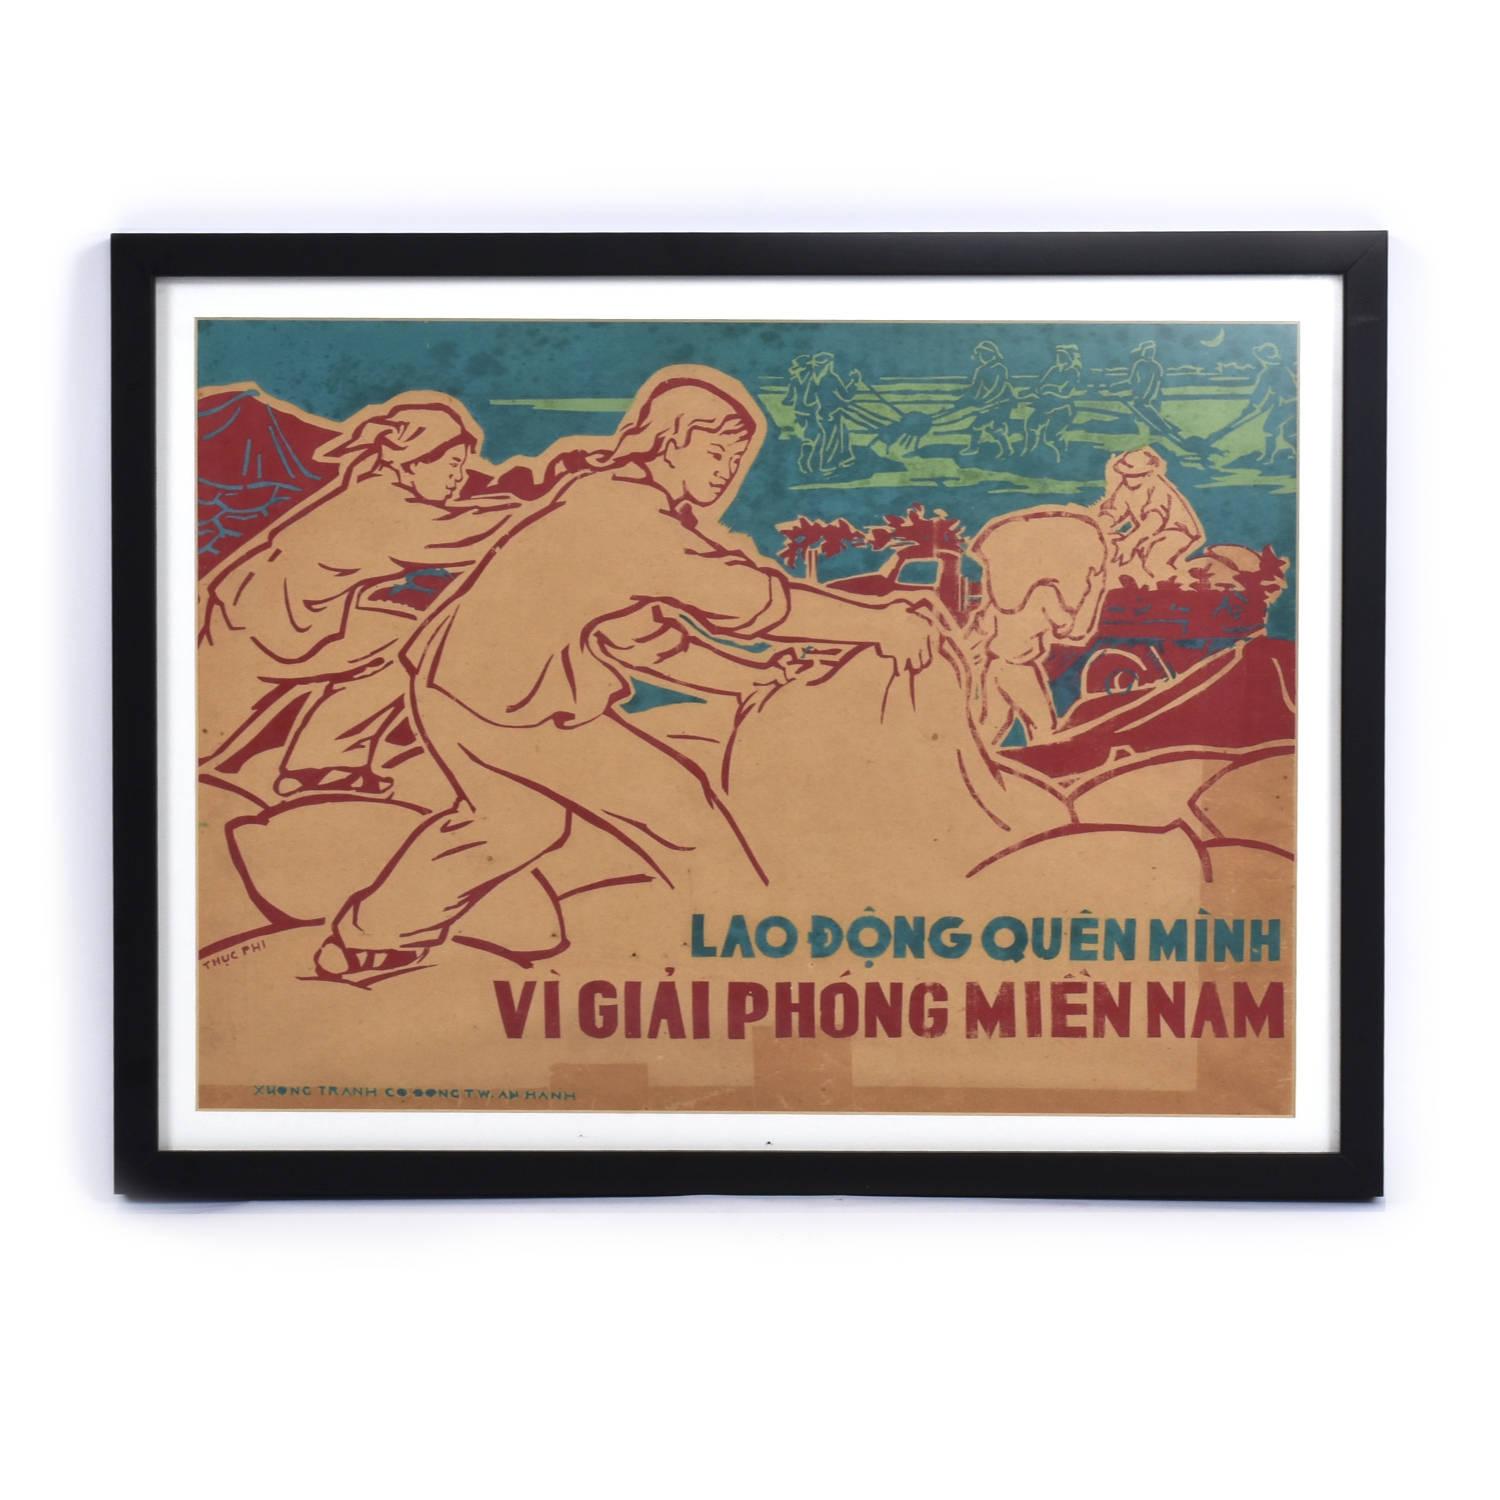 Group of three North Vietnam war propaganda posters. The posters appear to be original. Shadows from previous tape can be seen toward the bottom of the “Lao Dong Quen Minh” poster. The images are produced on paper and look to be screen printed. The